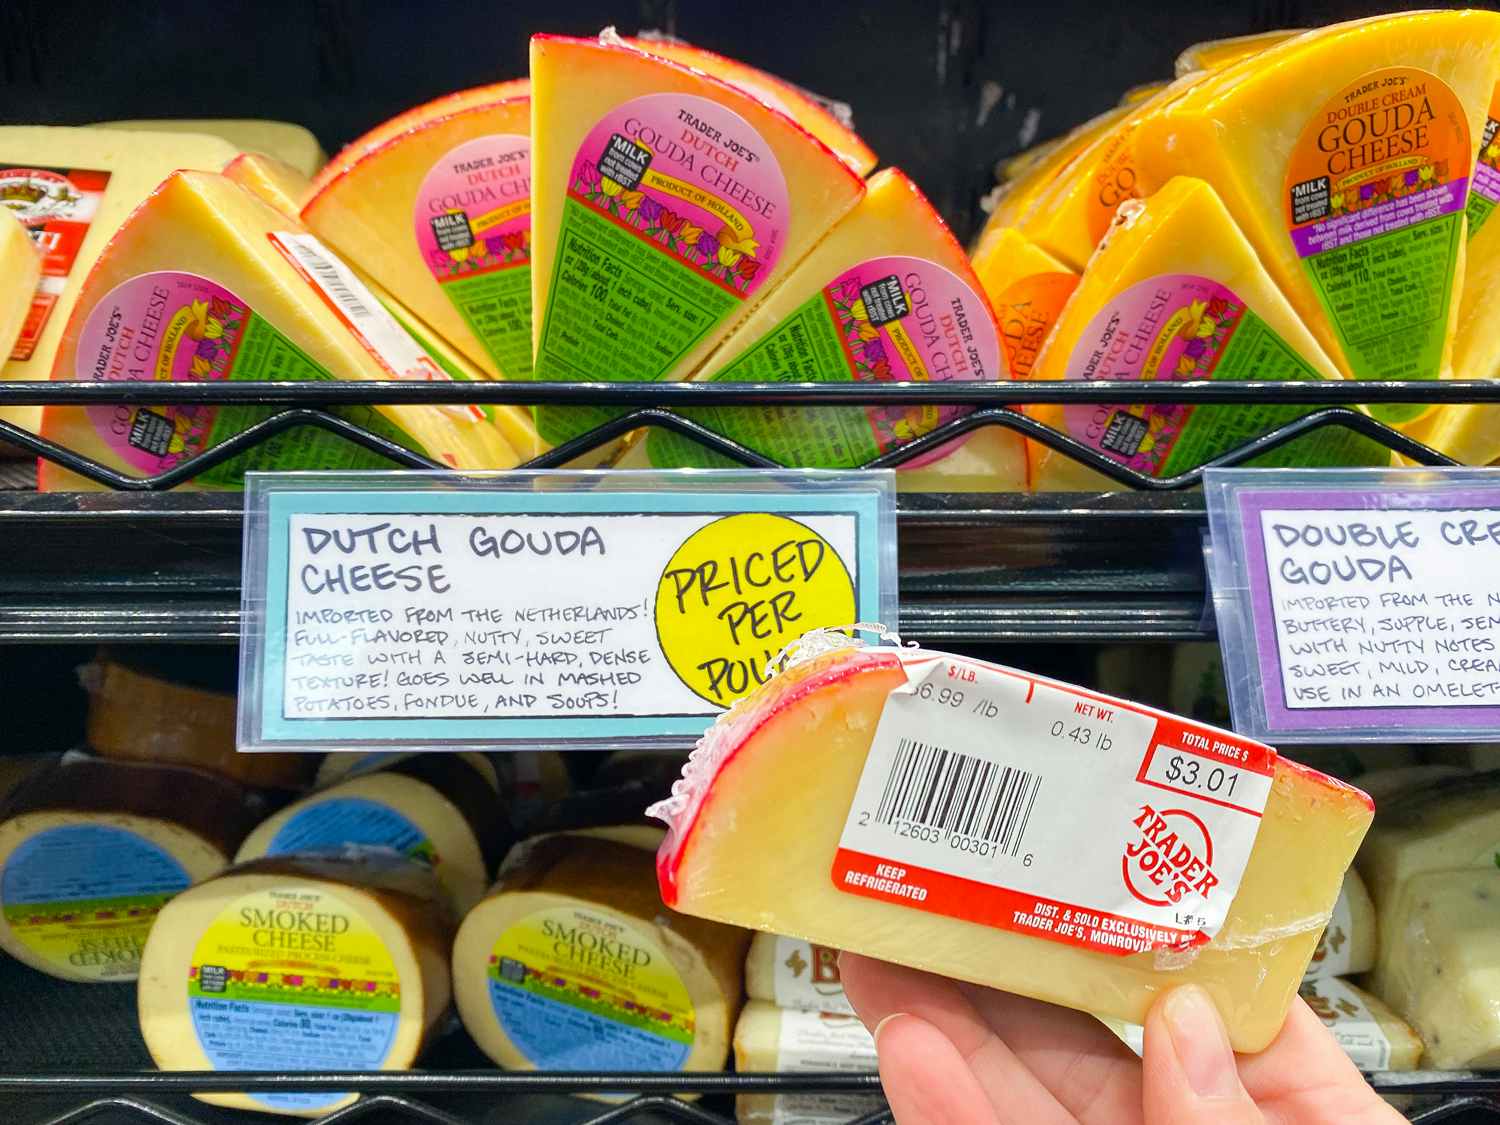 trader joes dutch gouda cheese wedge and price